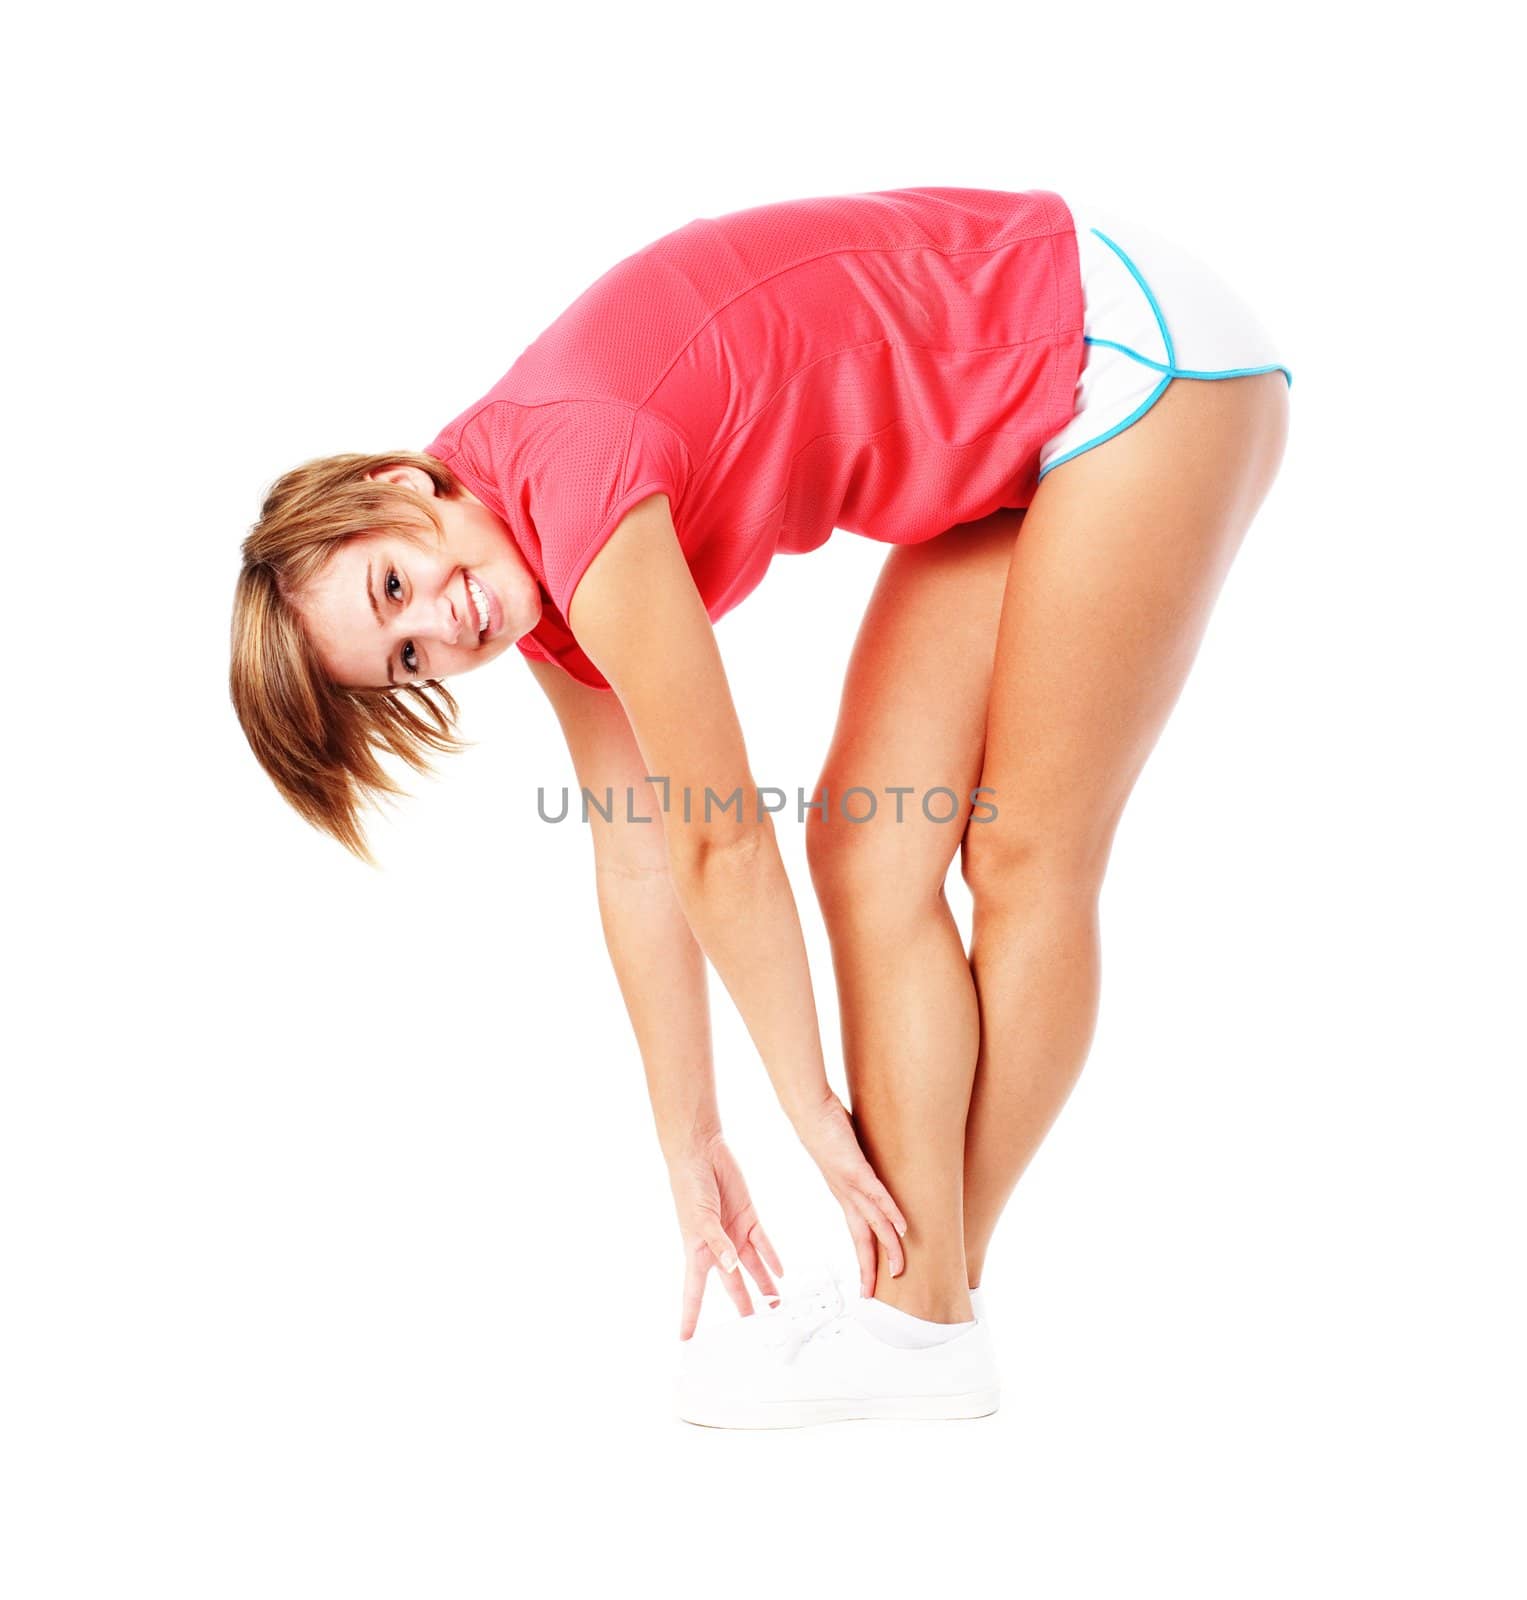 Young Fitness Woman in Red Shirt Stretching, Isolated on White by cardmaverick